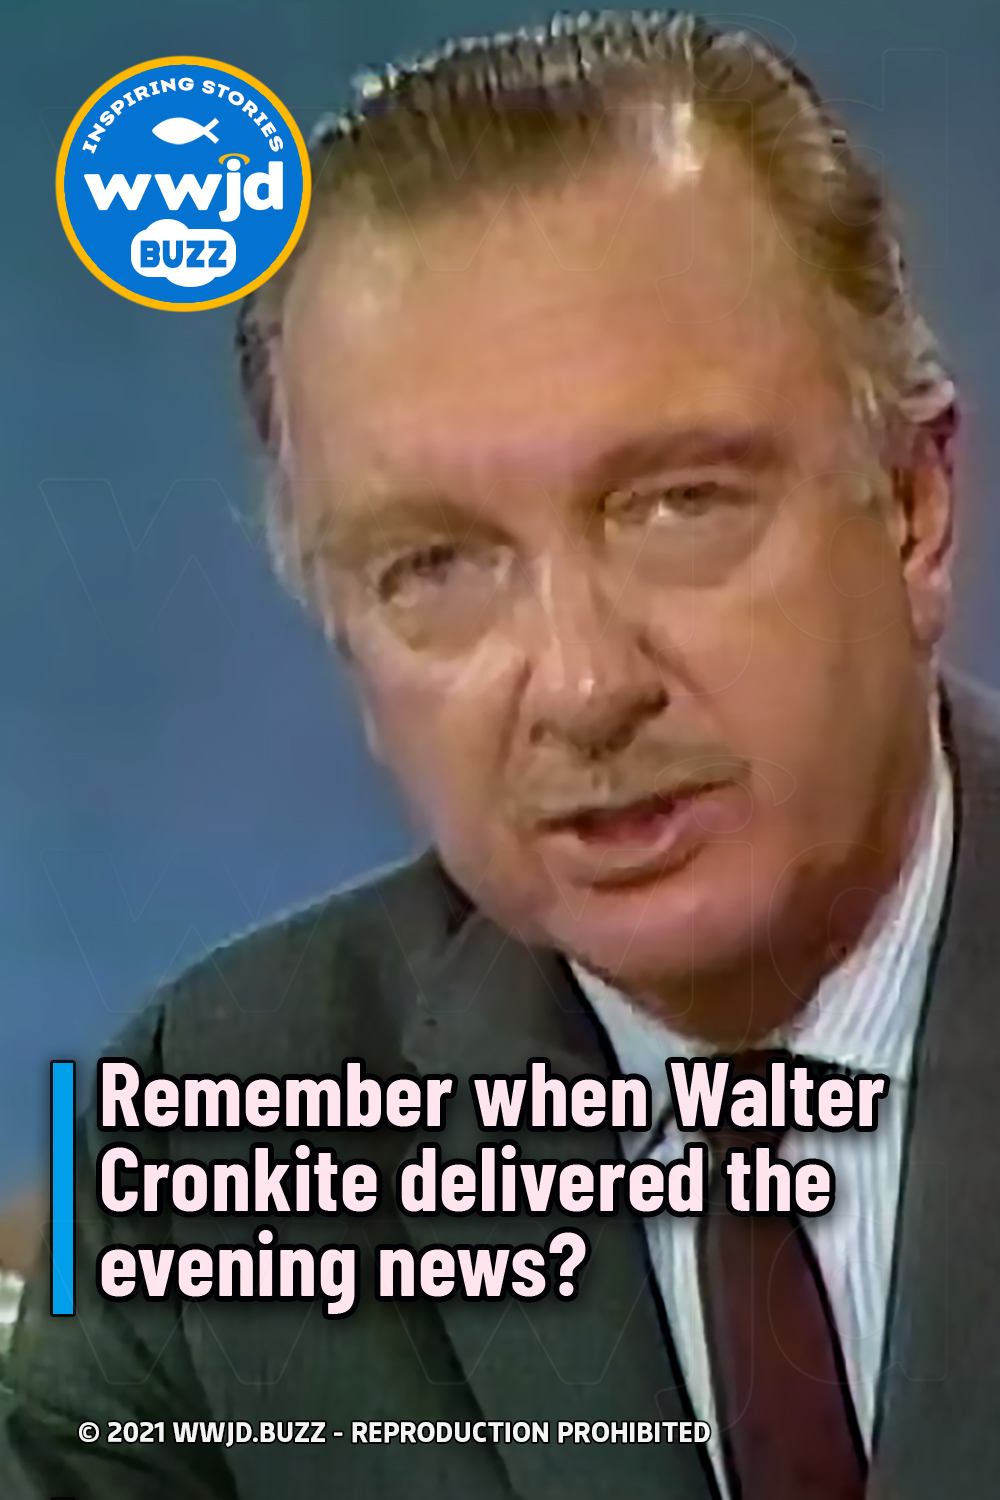 Remember when Walter Cronkite delivered the evening news?